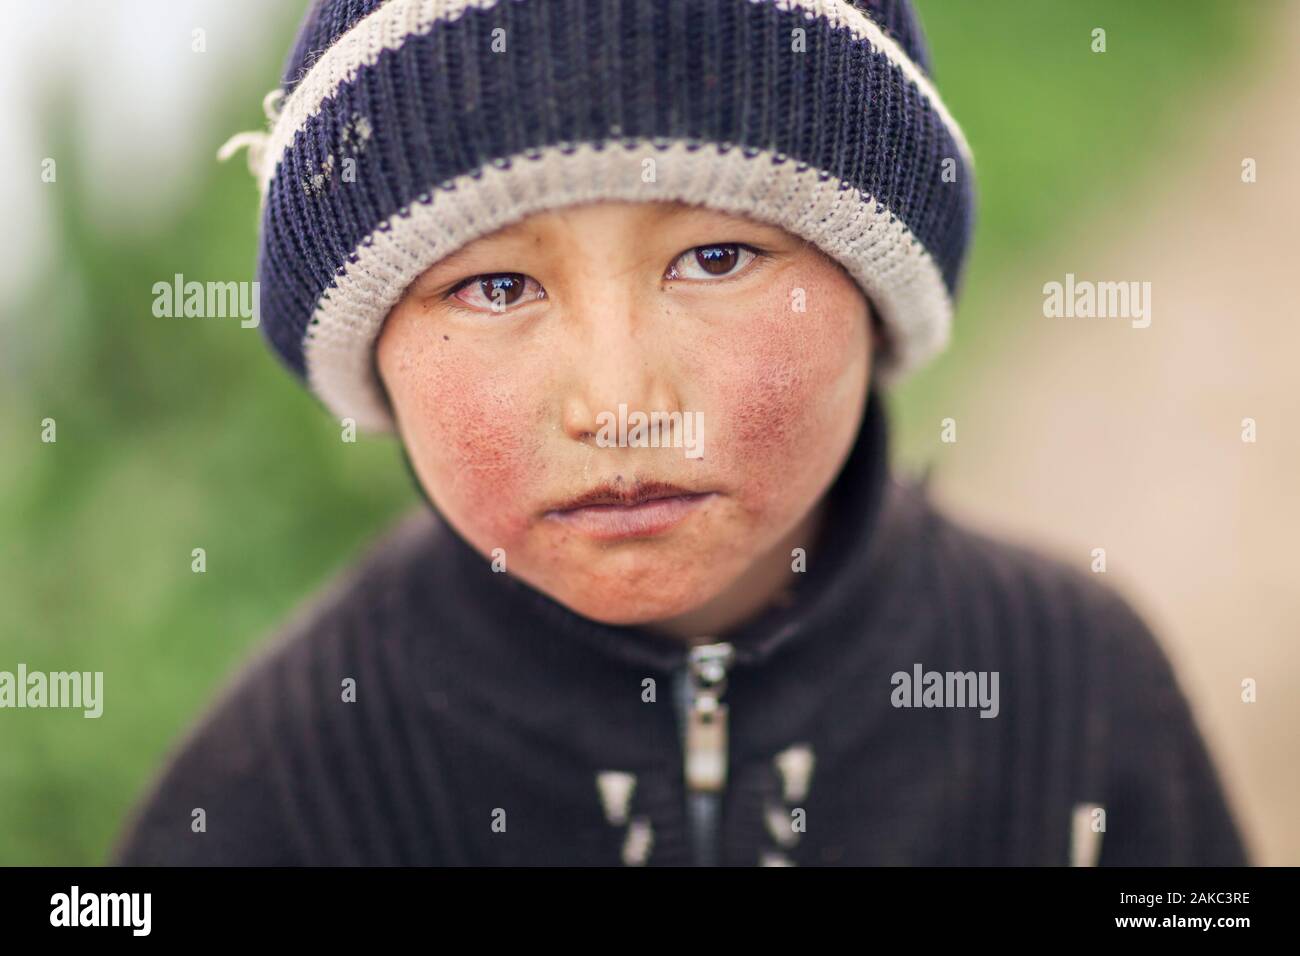 Kyrgyzstan, Osh province, Sary-Moghul, portrait of a young boy Stock Photo